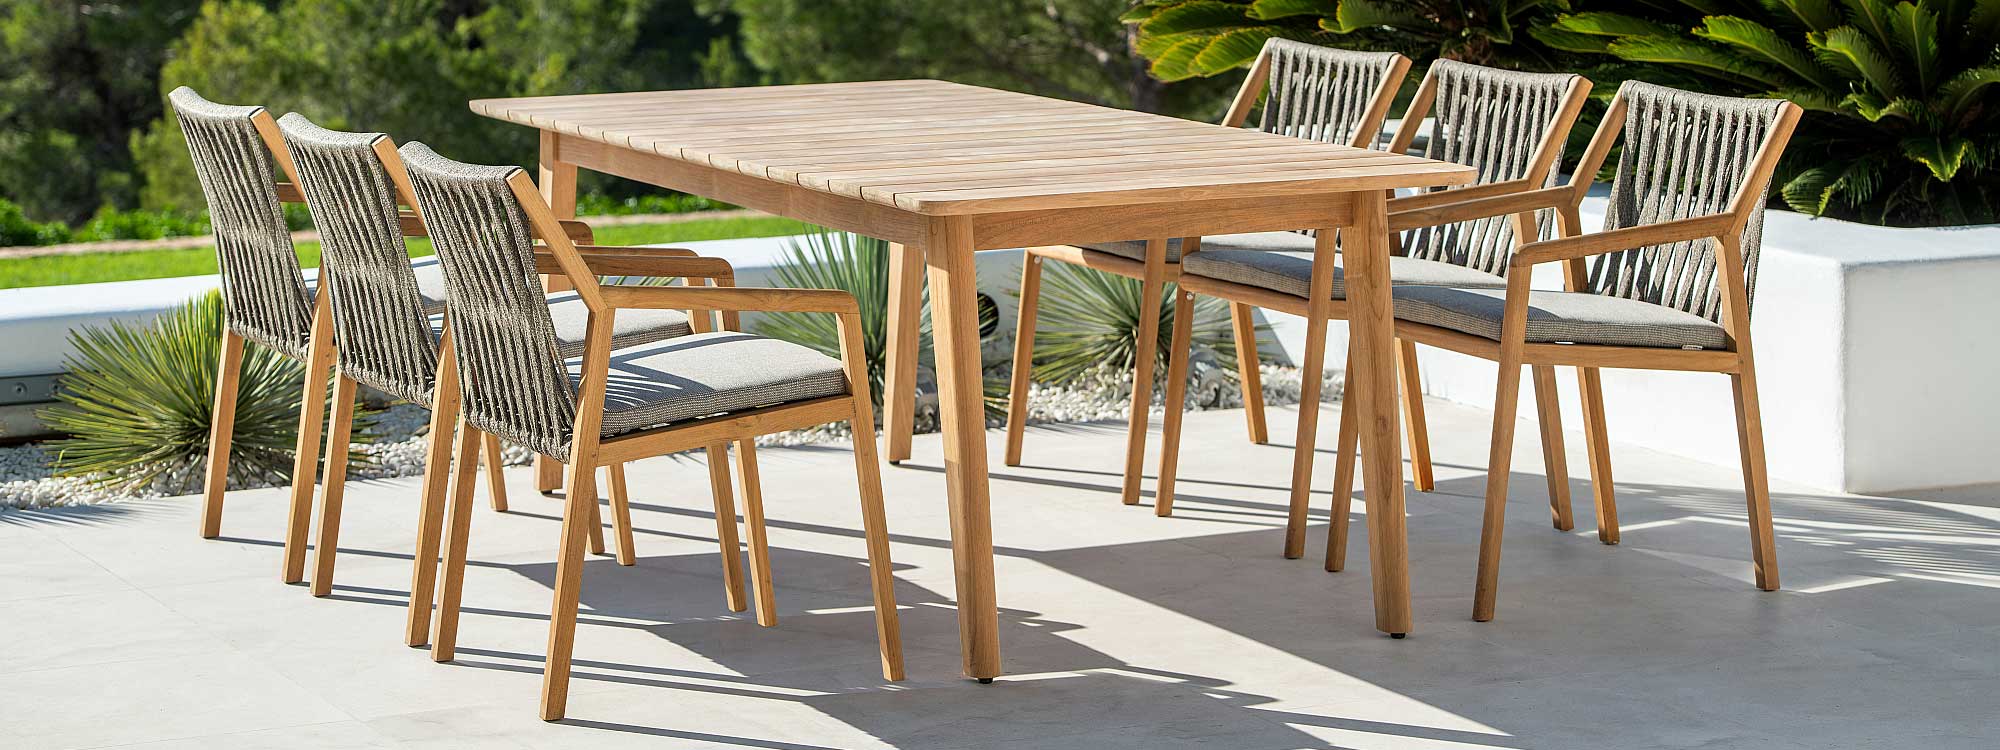 Image of Ritz teak garden table and chairs with Taupe Polyolefin rope seat and back on sunny terrace